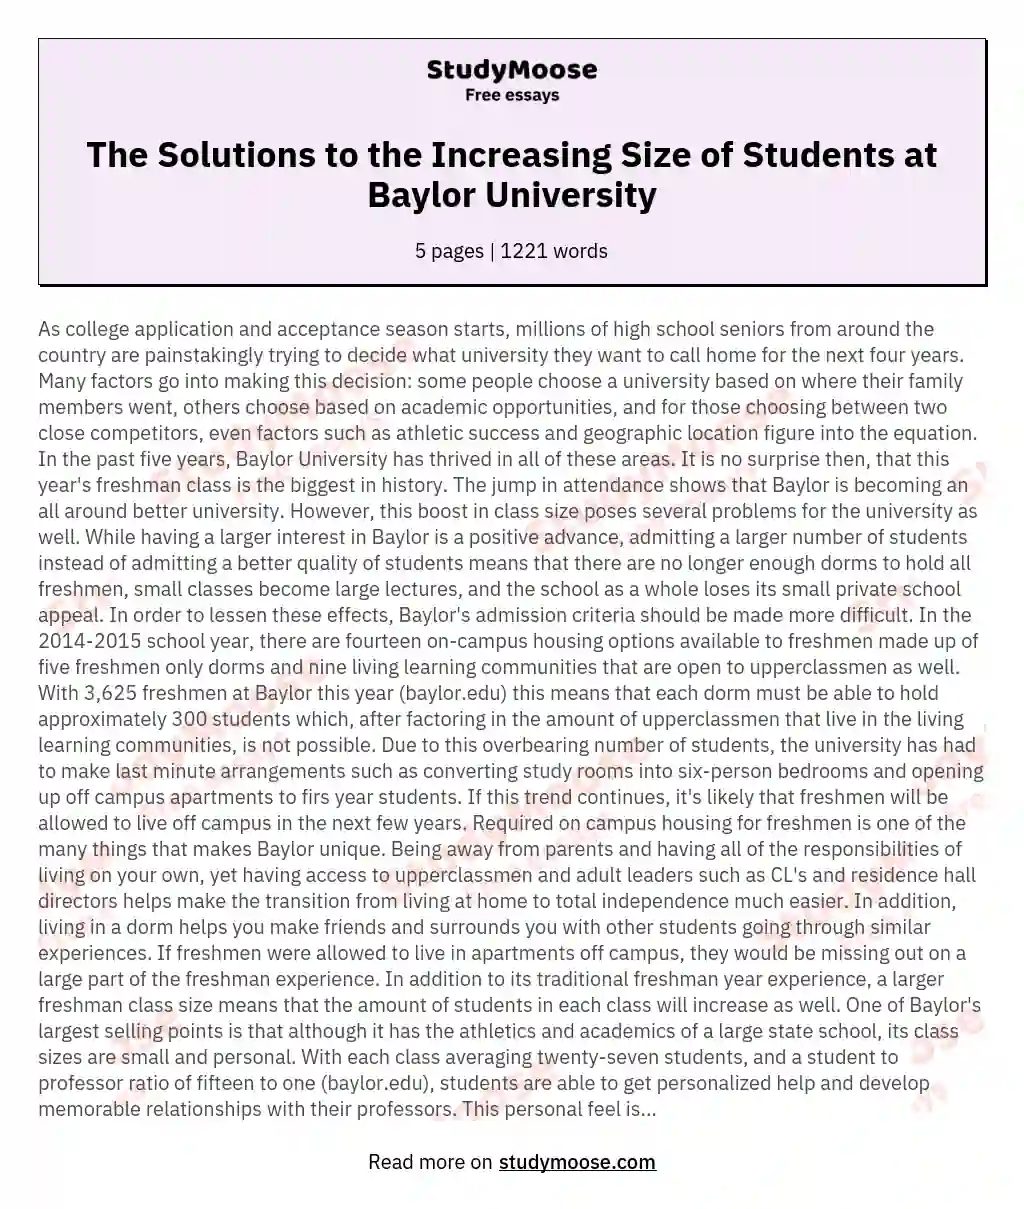 The Solutions to the Increasing Size of Students at Baylor University